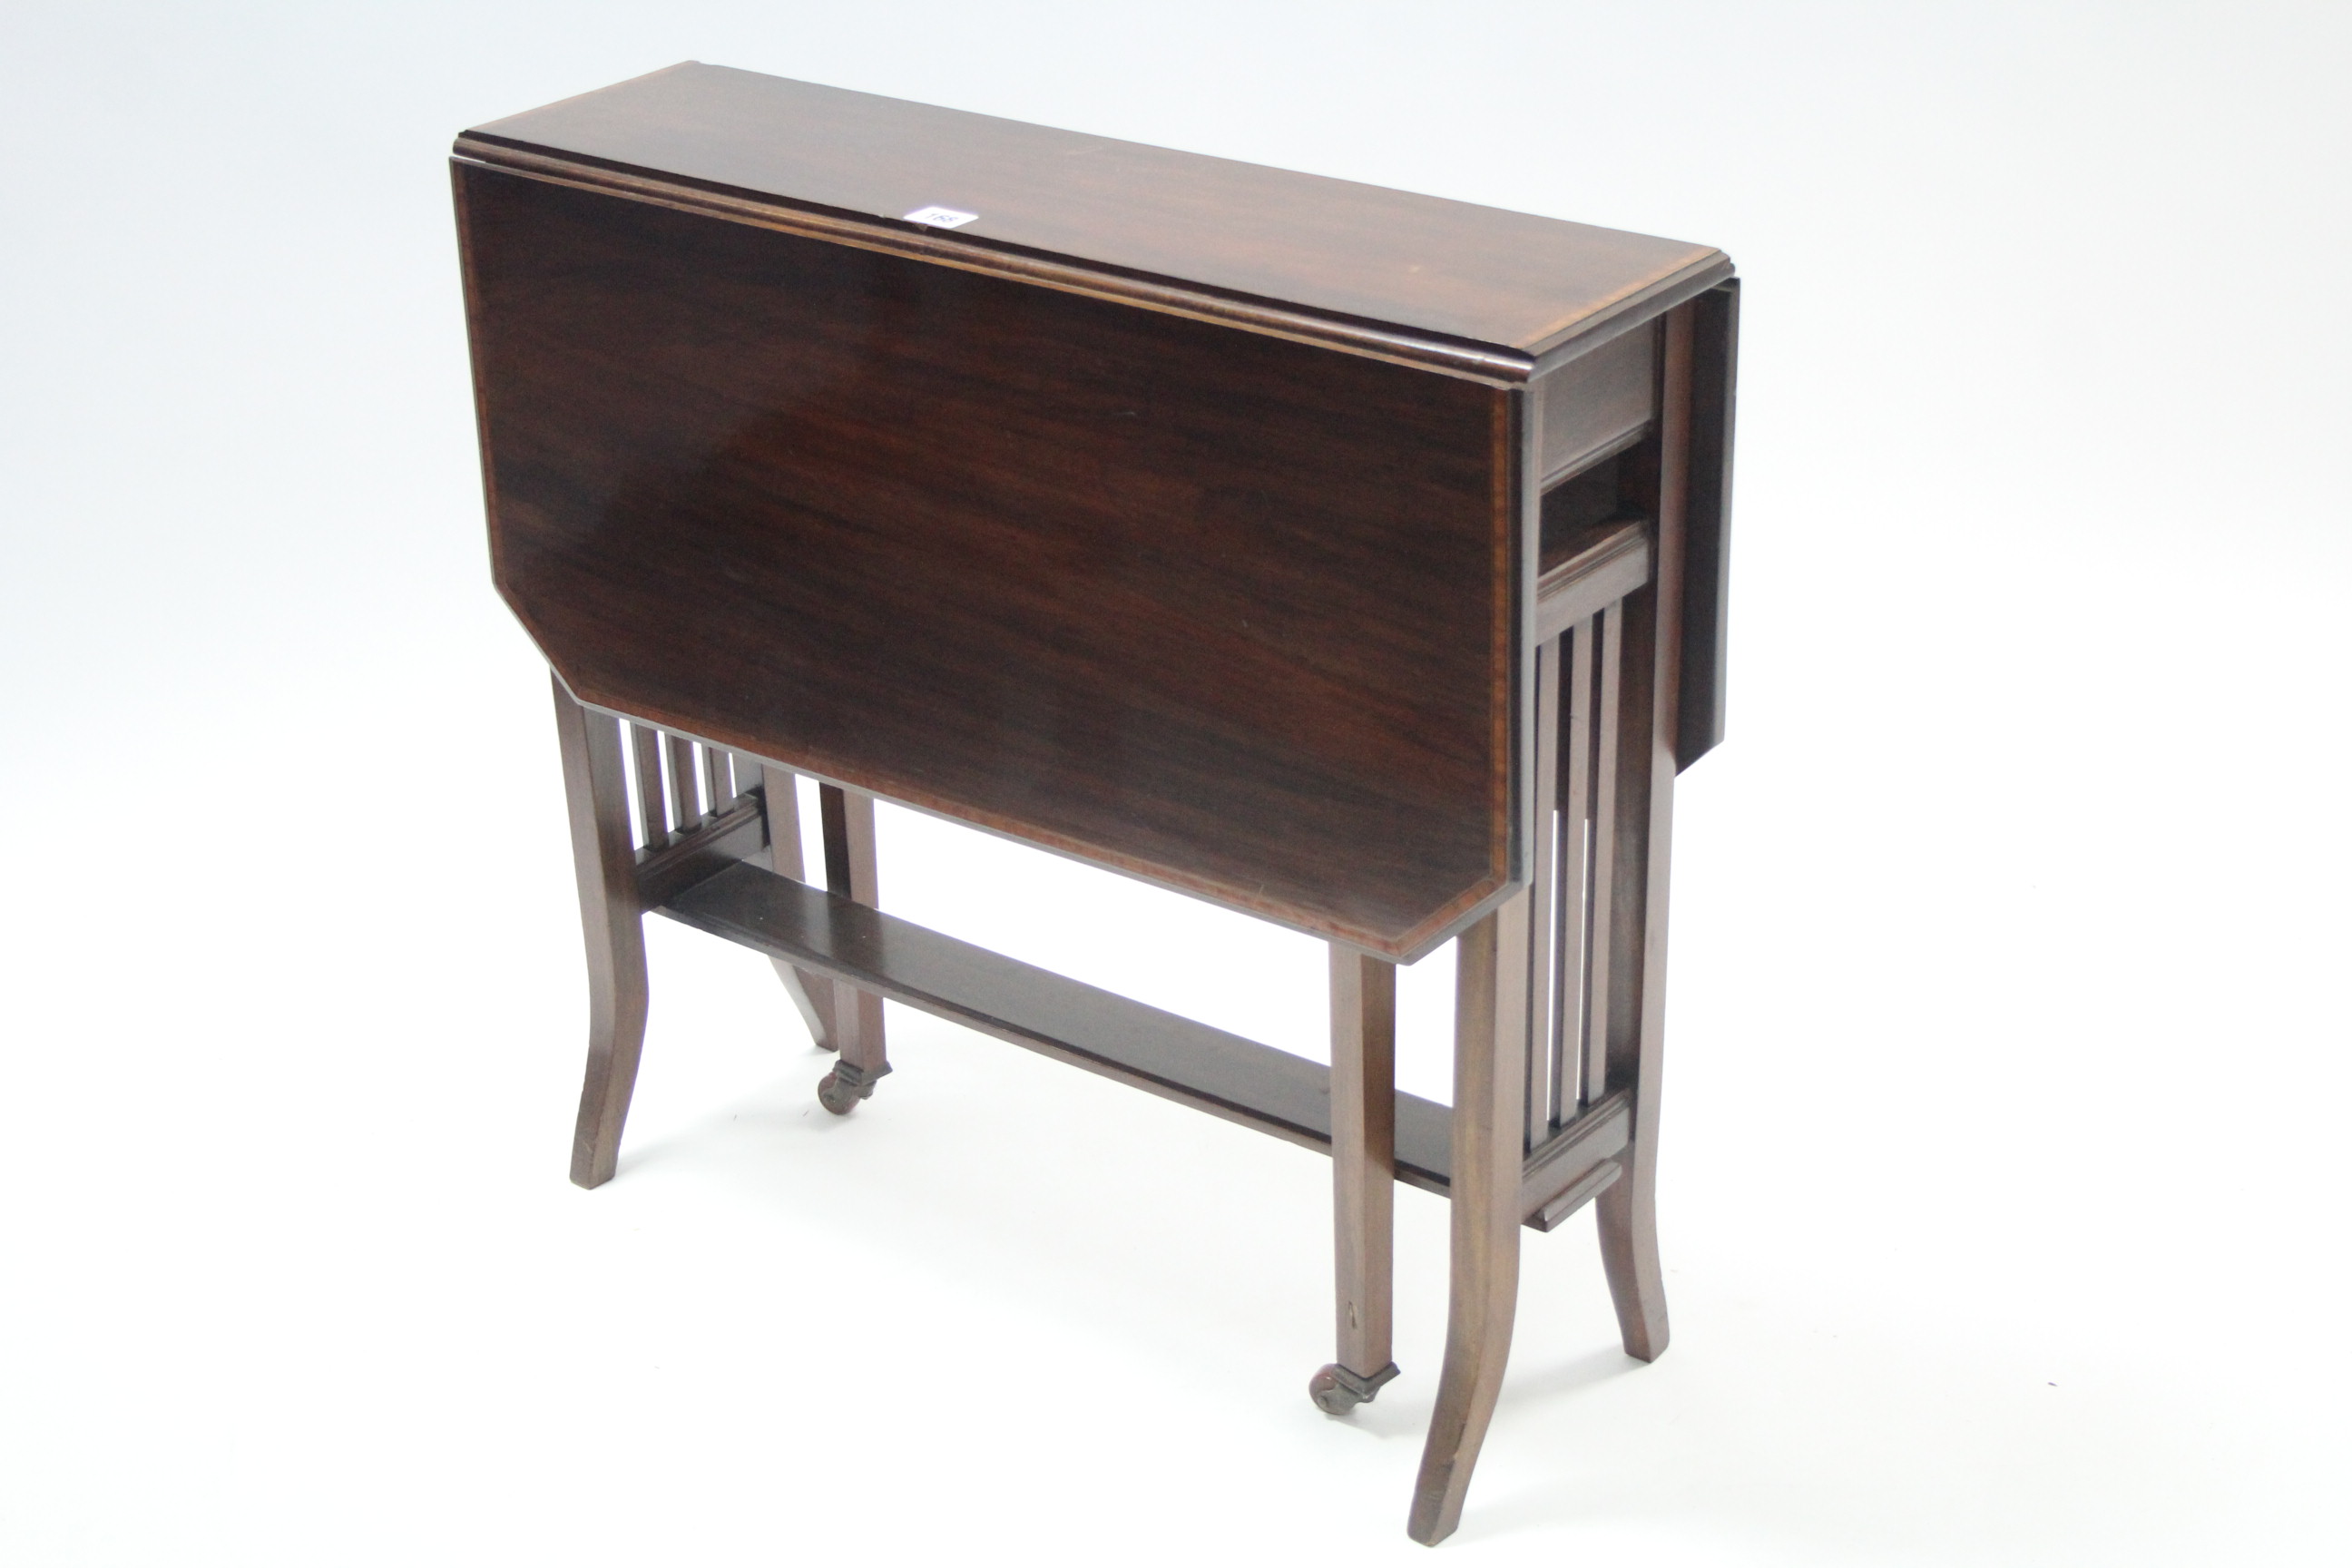 An Edwardian inlaid-mahogany Sutherland table with canted corners to the rectangular top, & on